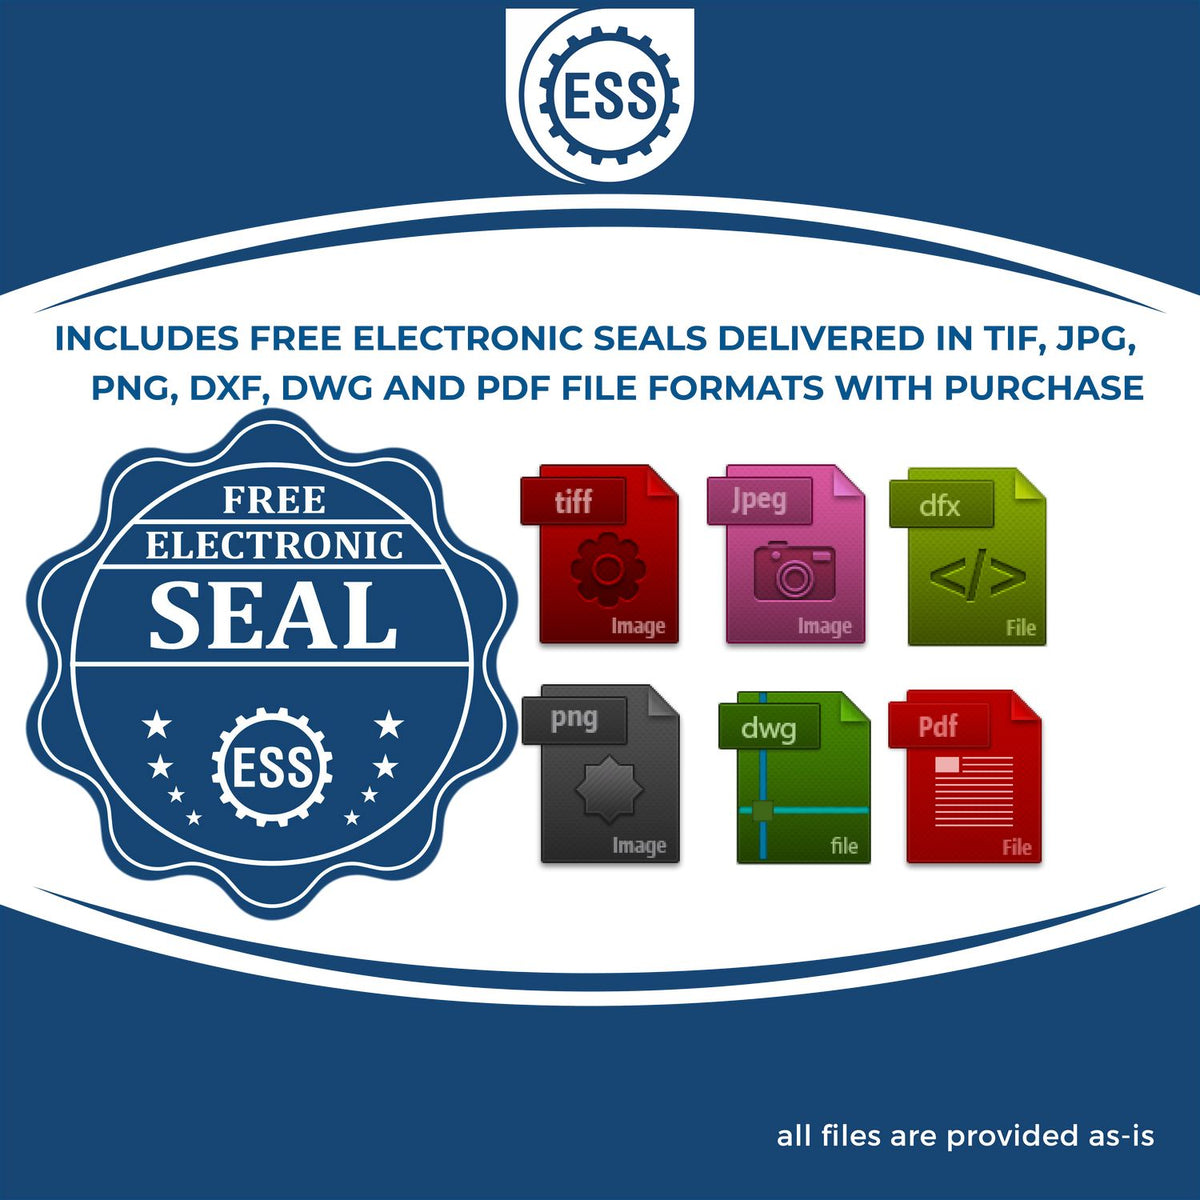 An infographic for the free electronic seal for the New York Professional Engineer Seal Stamp illustrating the different file type icons such as DXF, DWG, TIF, JPG and PNG.